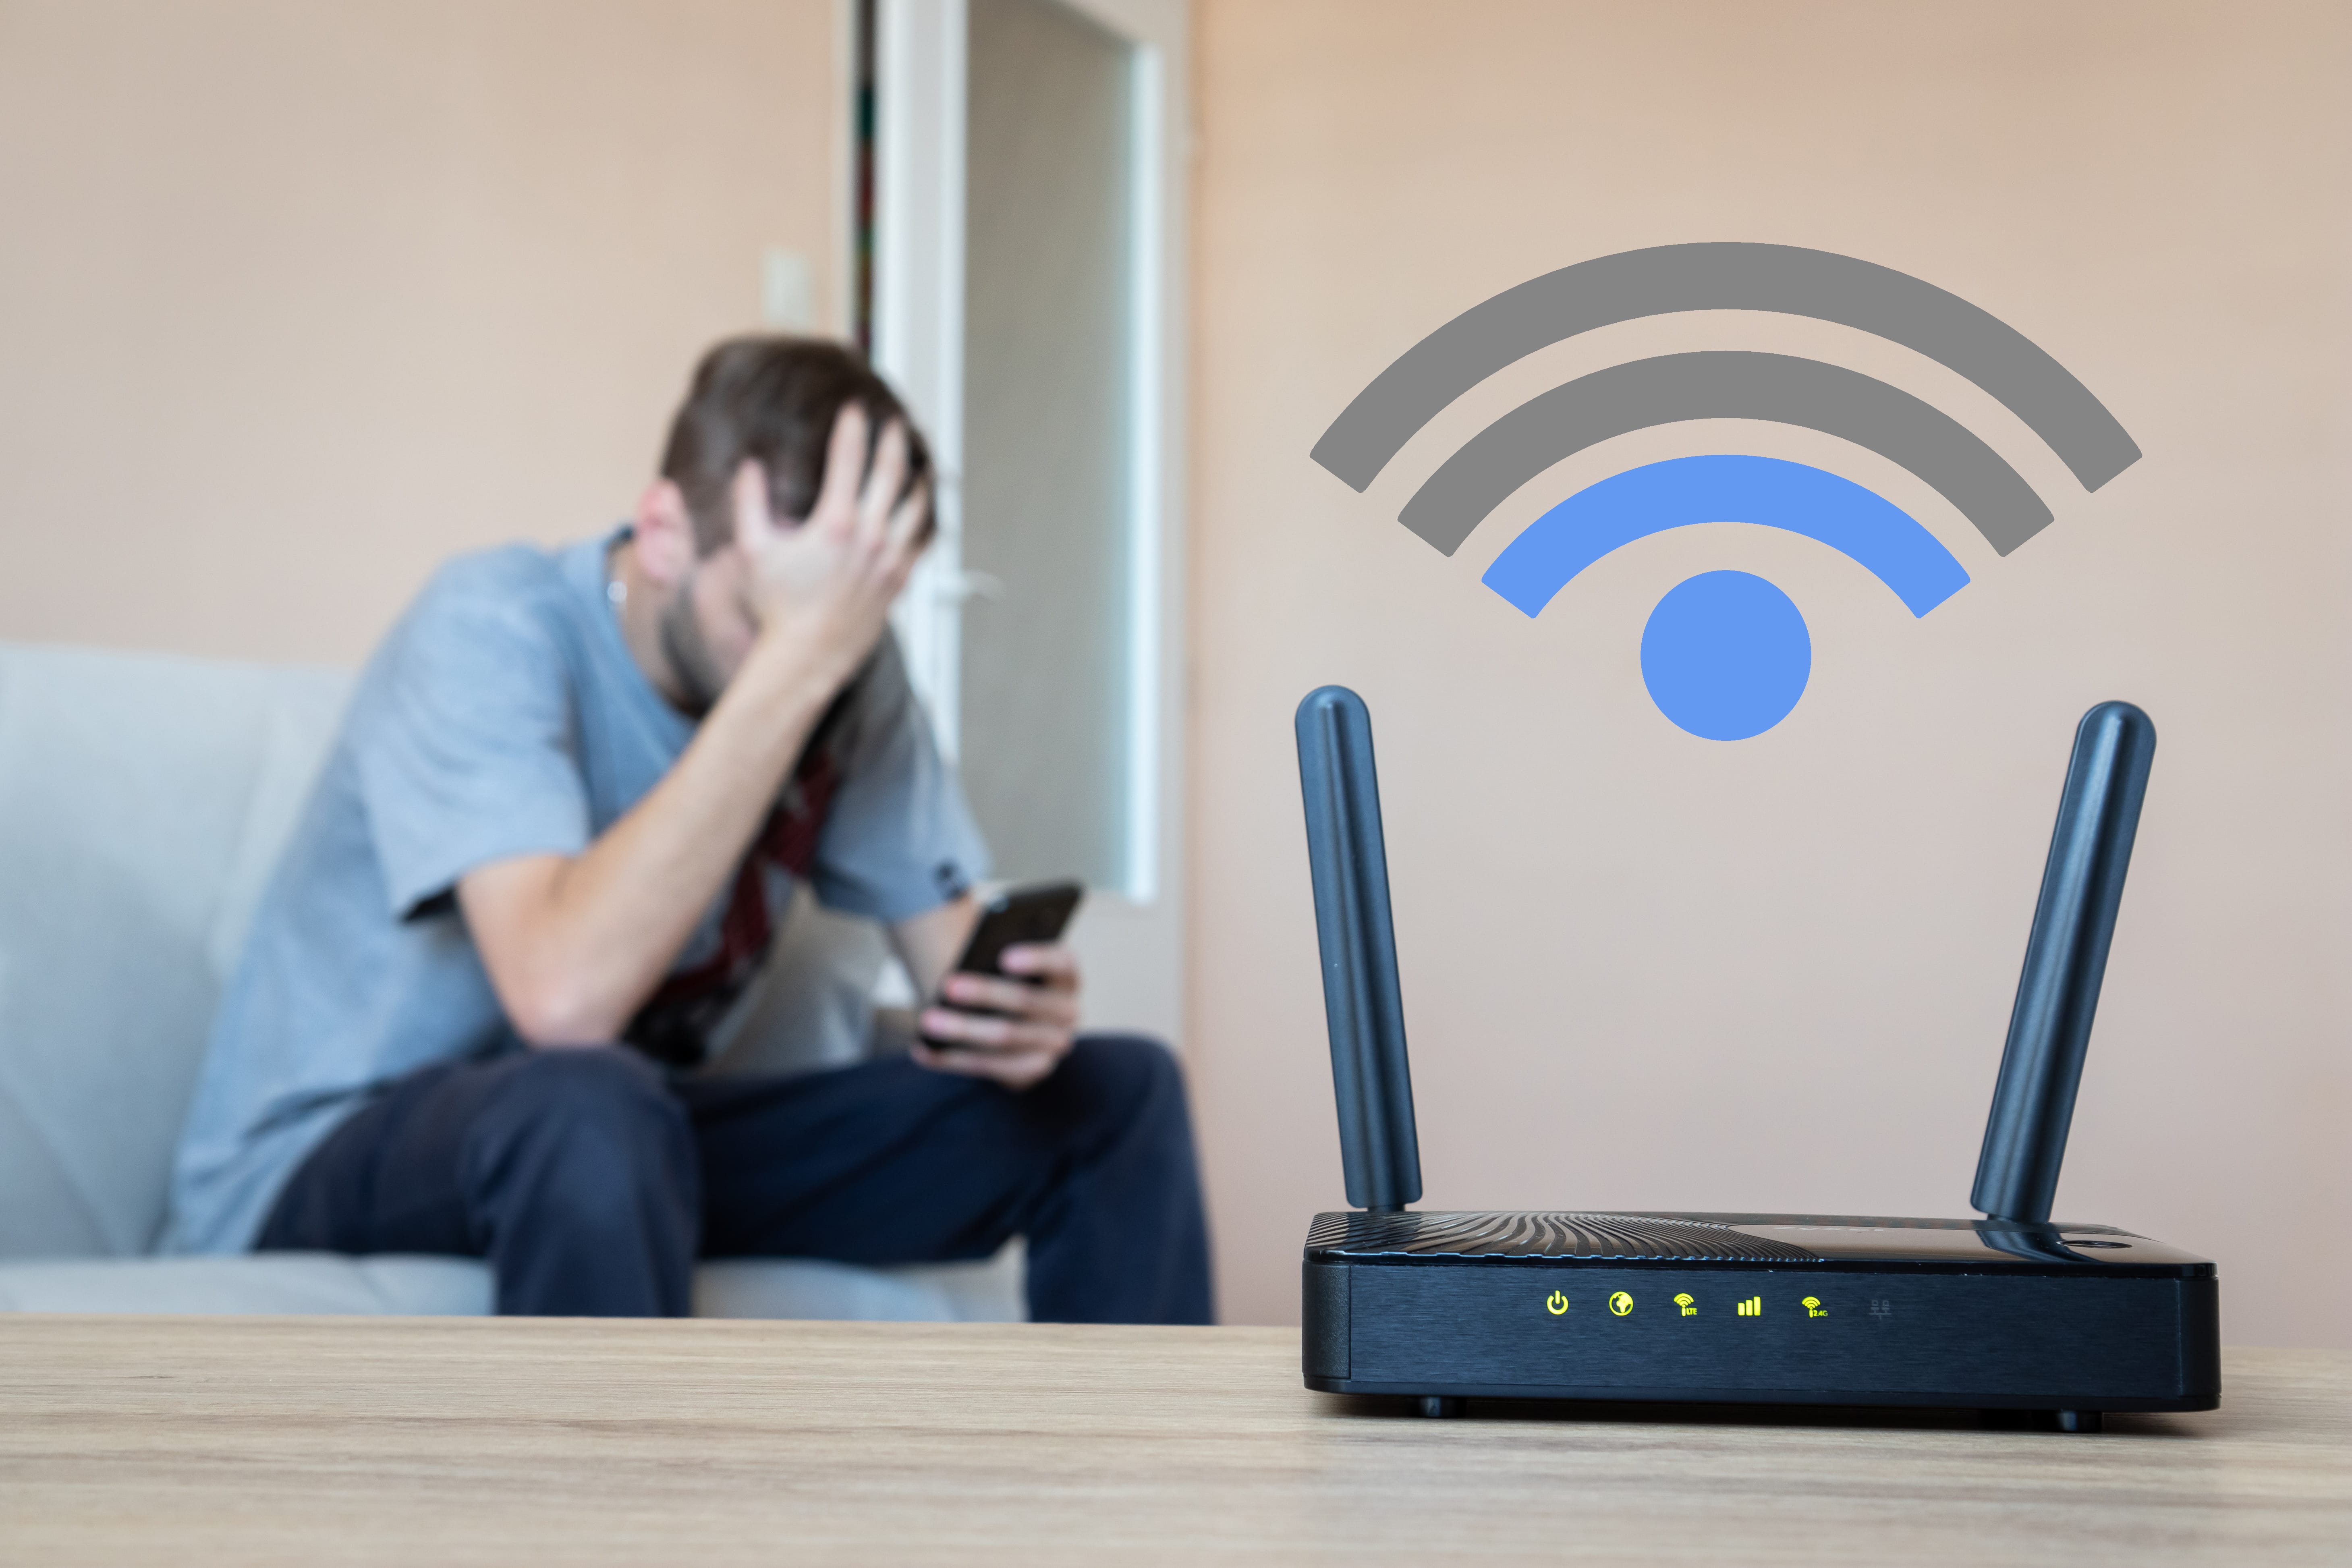 wifi switches from on to looking for networks